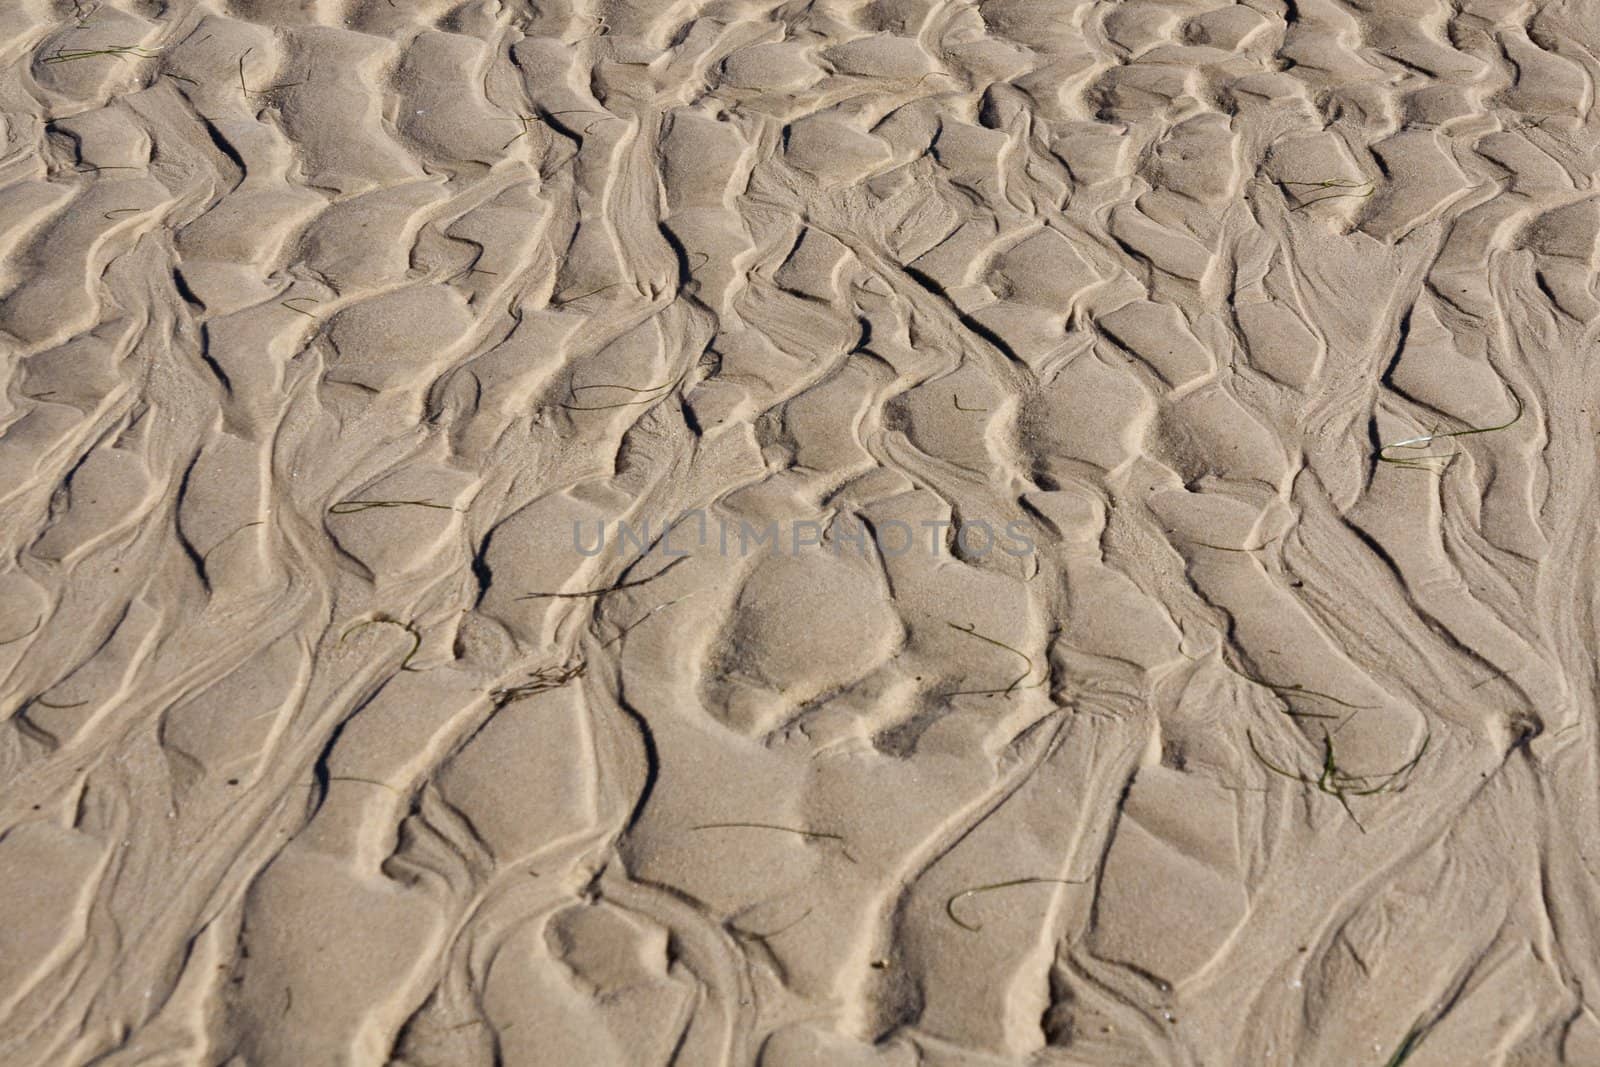 View of natural ripples made by the tide on the sand.